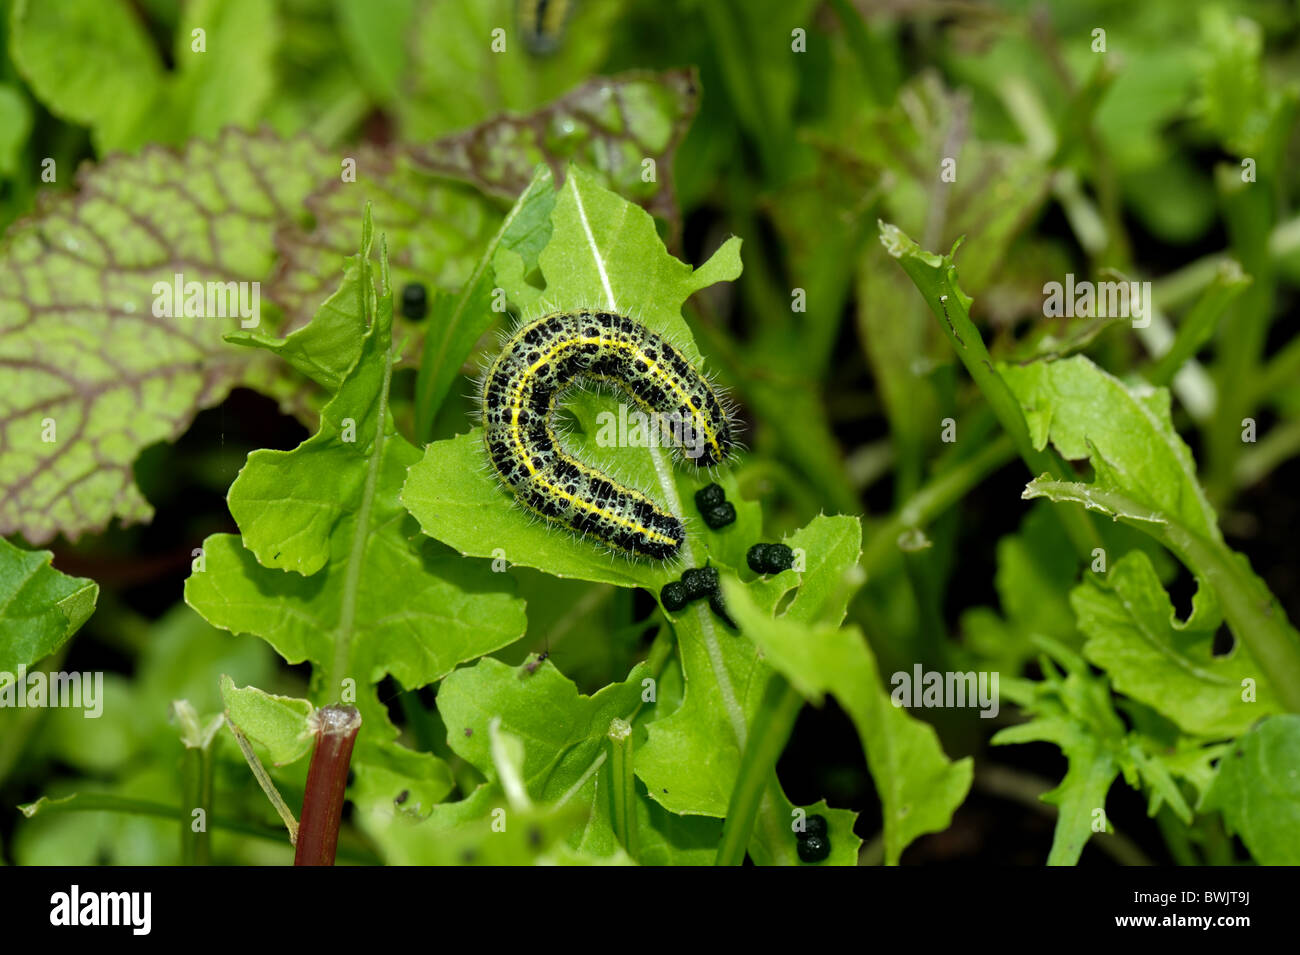 Cabbage white butterfly caterpillar (Pieris brassicae) on young rocket leaves Stock Photo